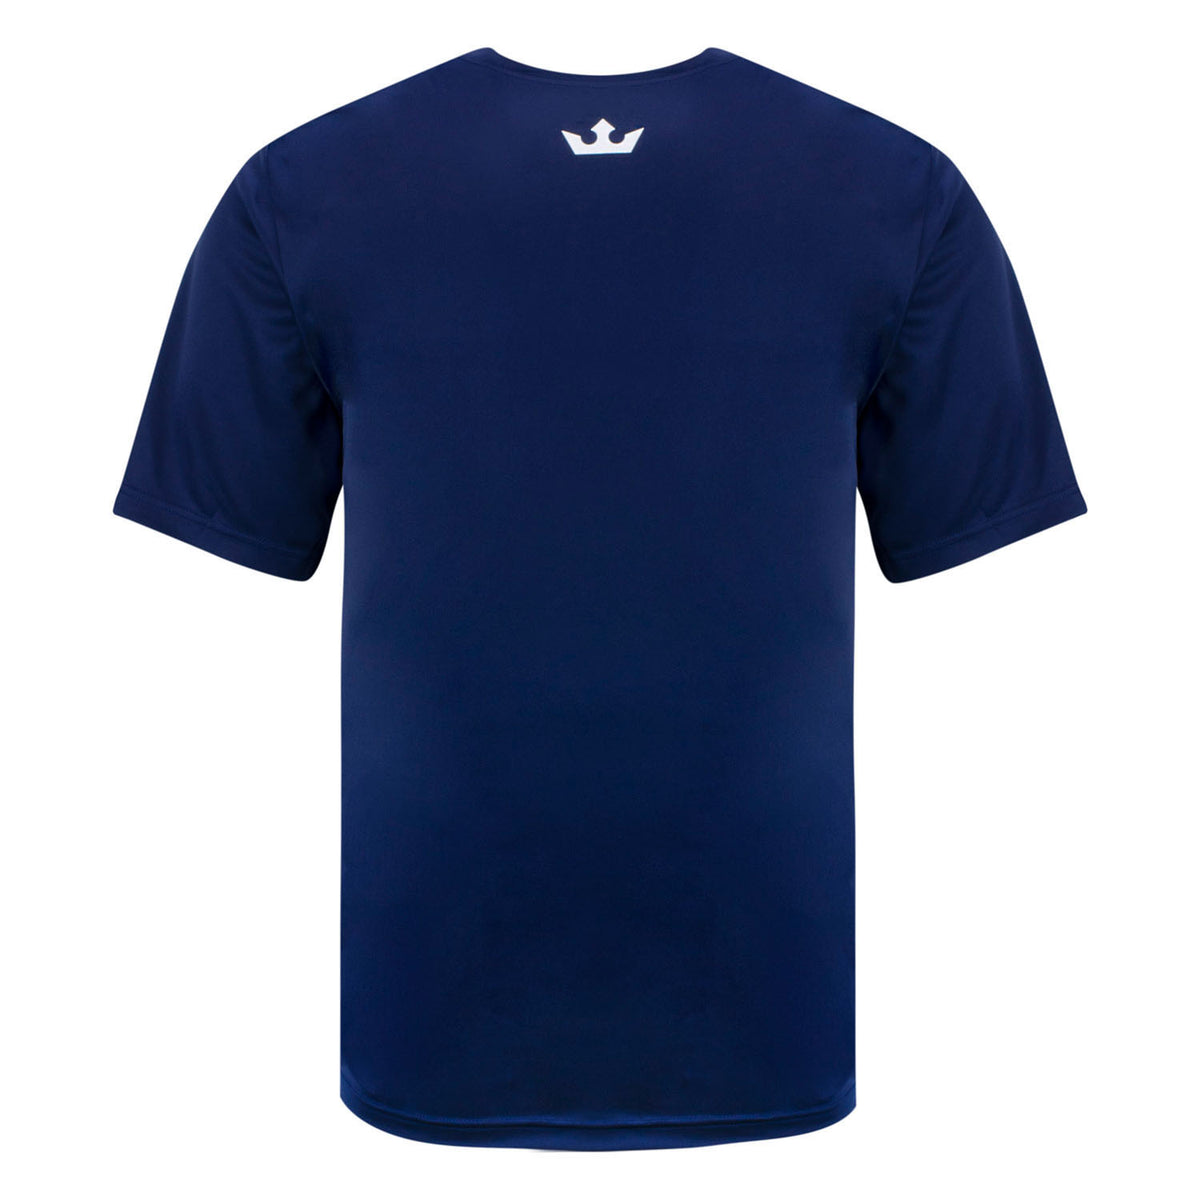 PFL Performance T-Shirt in Navy - Back View